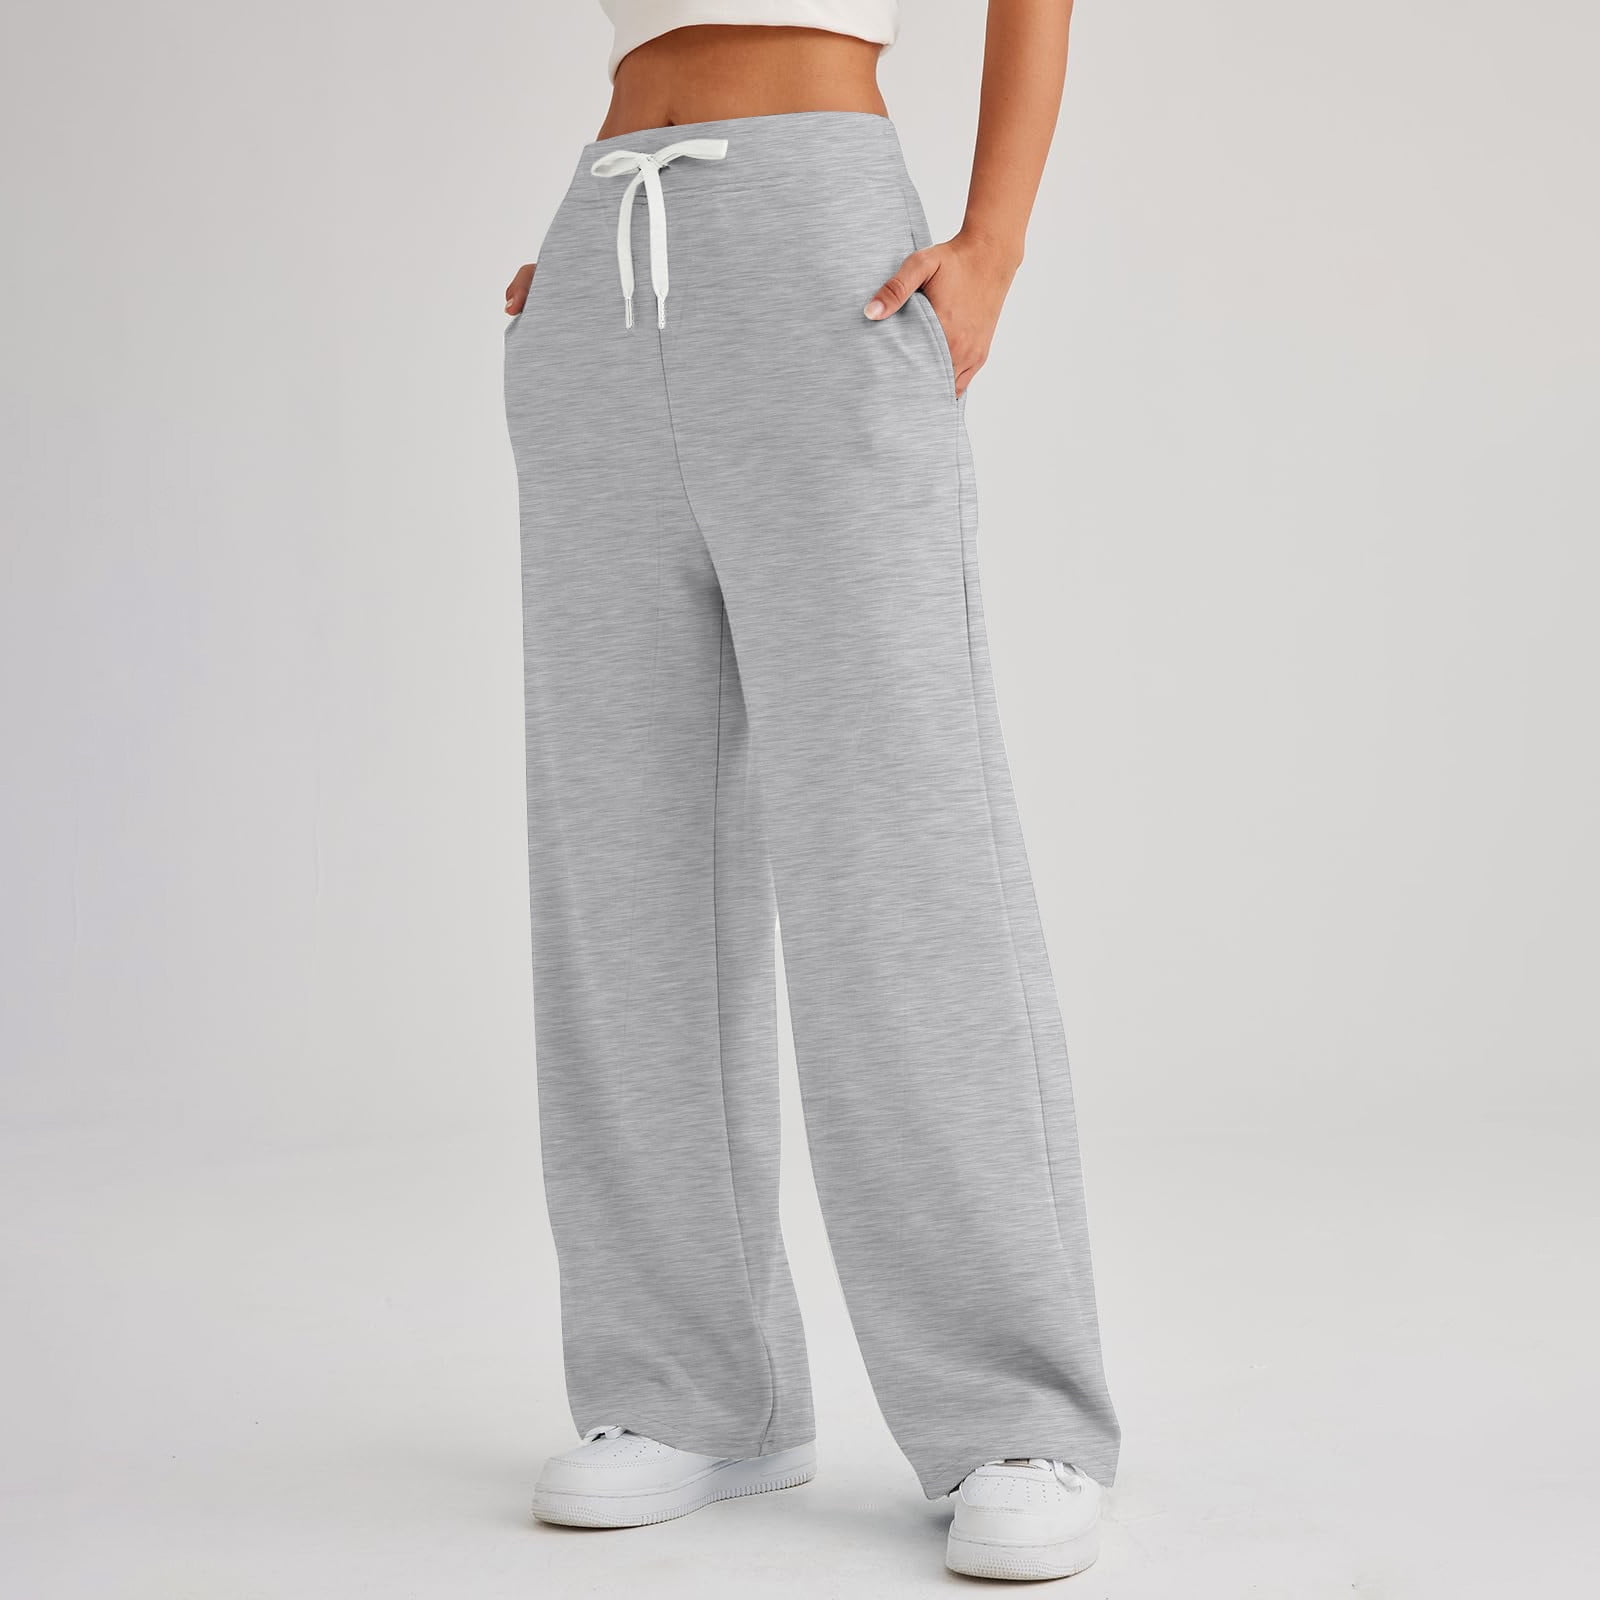 TQWQT Women's Wide Leg Sweatpants Casual Trendy Trending Loose Fit Comfy  High Wasited Elastic Waist Jogger Winter Sweat Pants with Pockets Light  Light